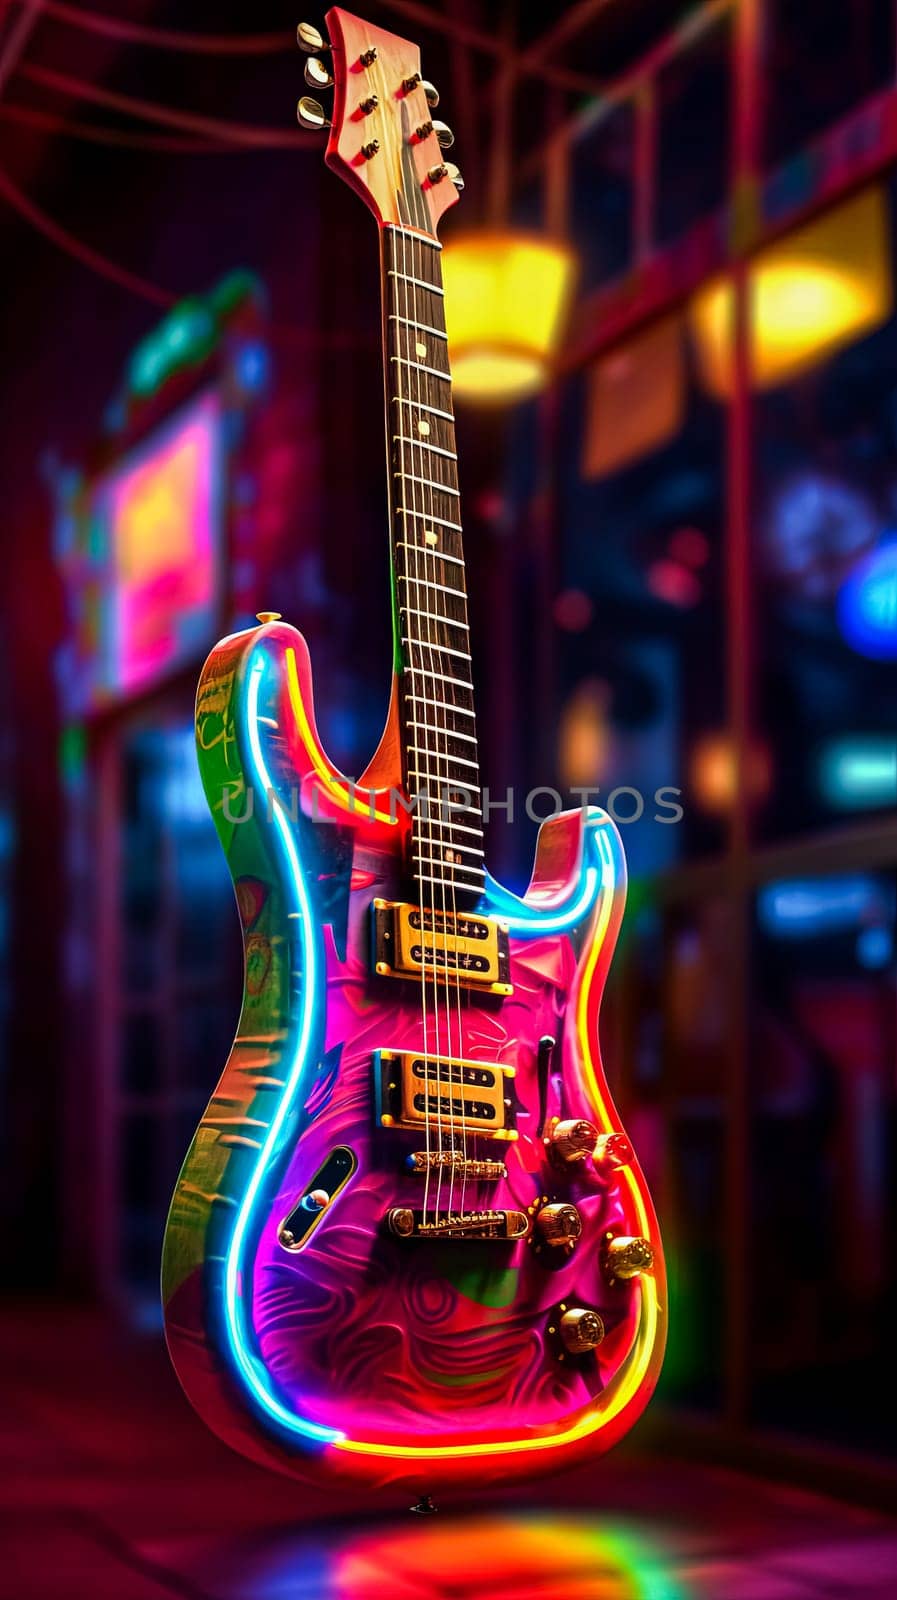 A neon guitar with a purple and blue color scheme. The guitar is lit up and he is glowing